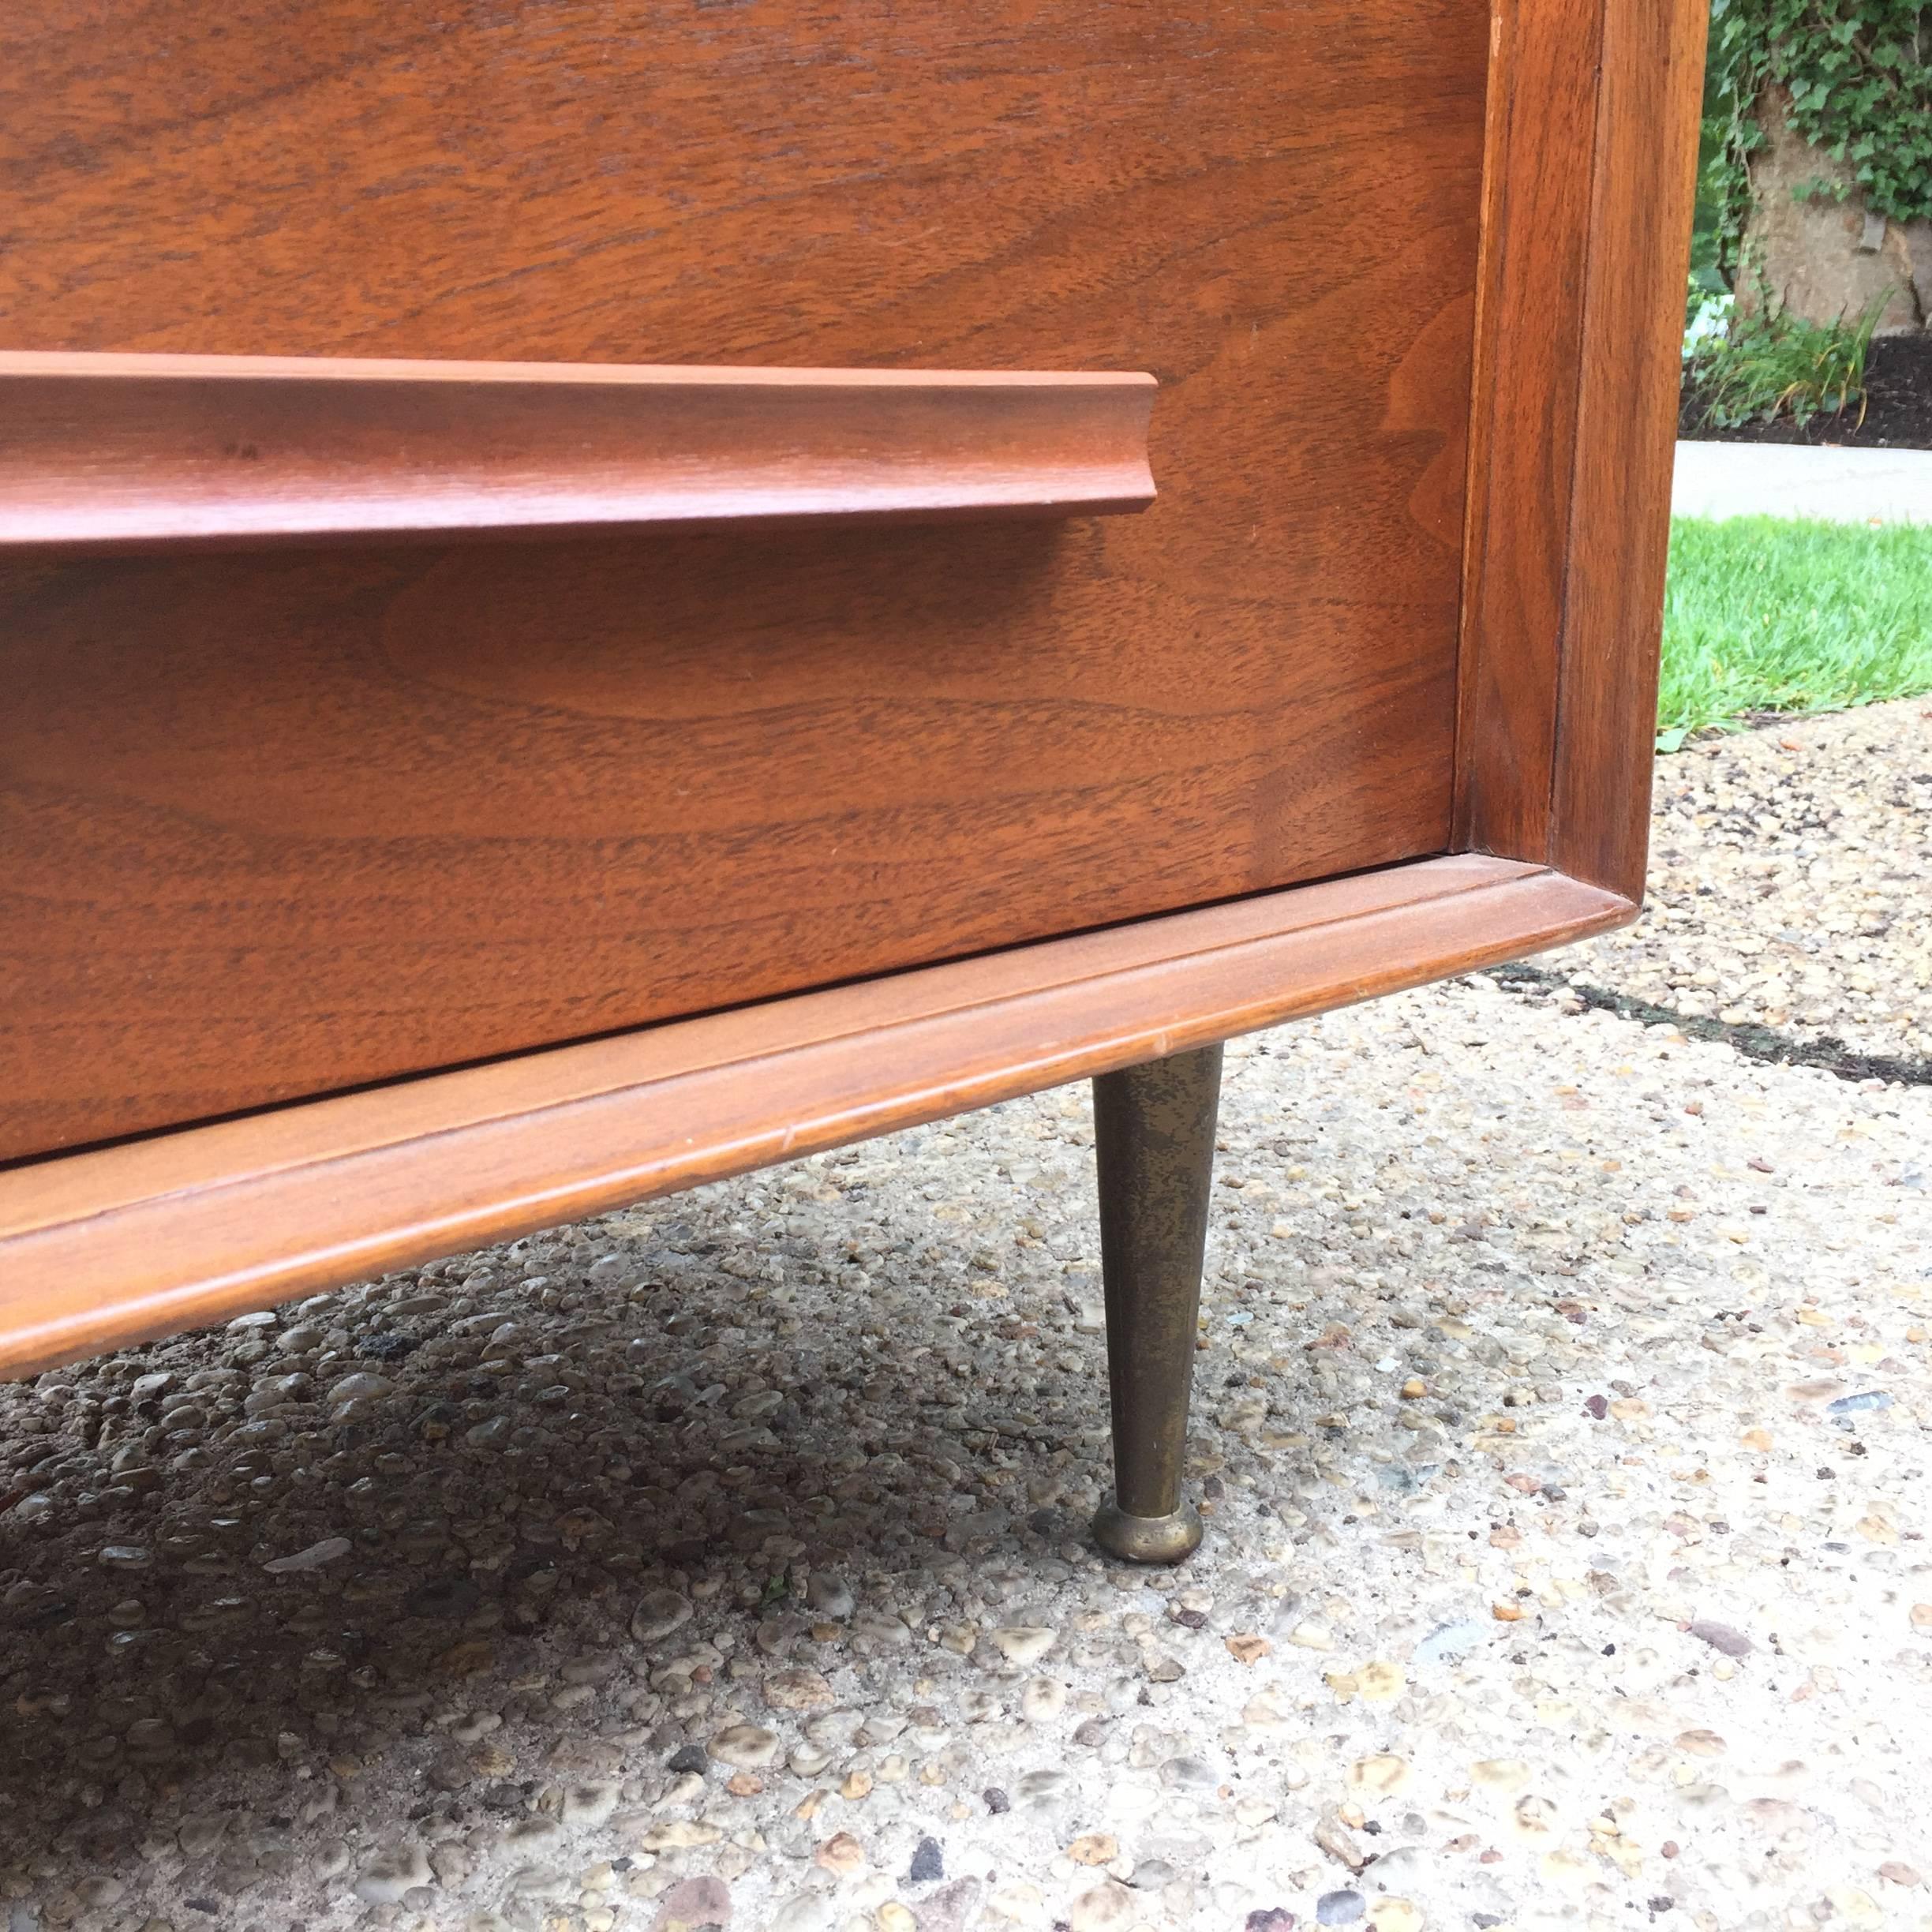 Beautiful tapered brass legs on this well-proportioned masculine dresser with three drawers. Very much in spirit of Gio Ponti.